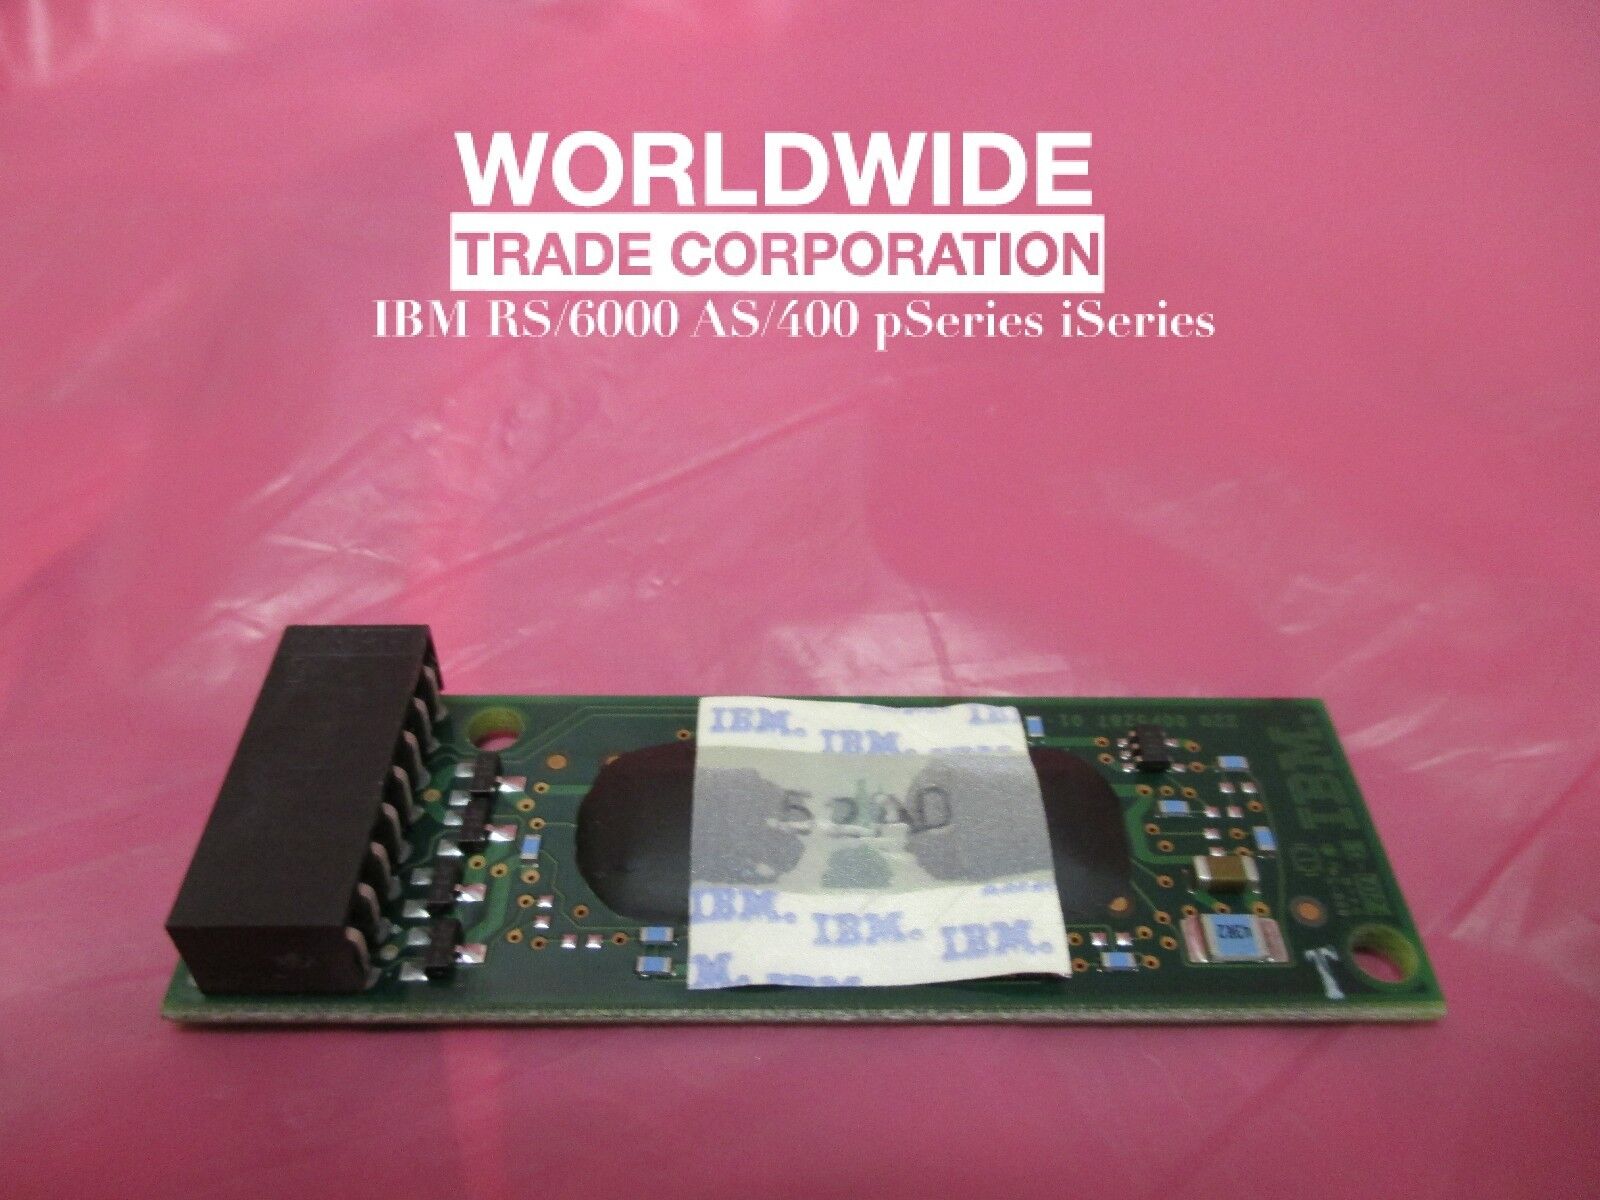 IBM 03N5211 52A0 VPD Card for 9110-51A ( 1.5GHz 4-Way Activated ) pSeries